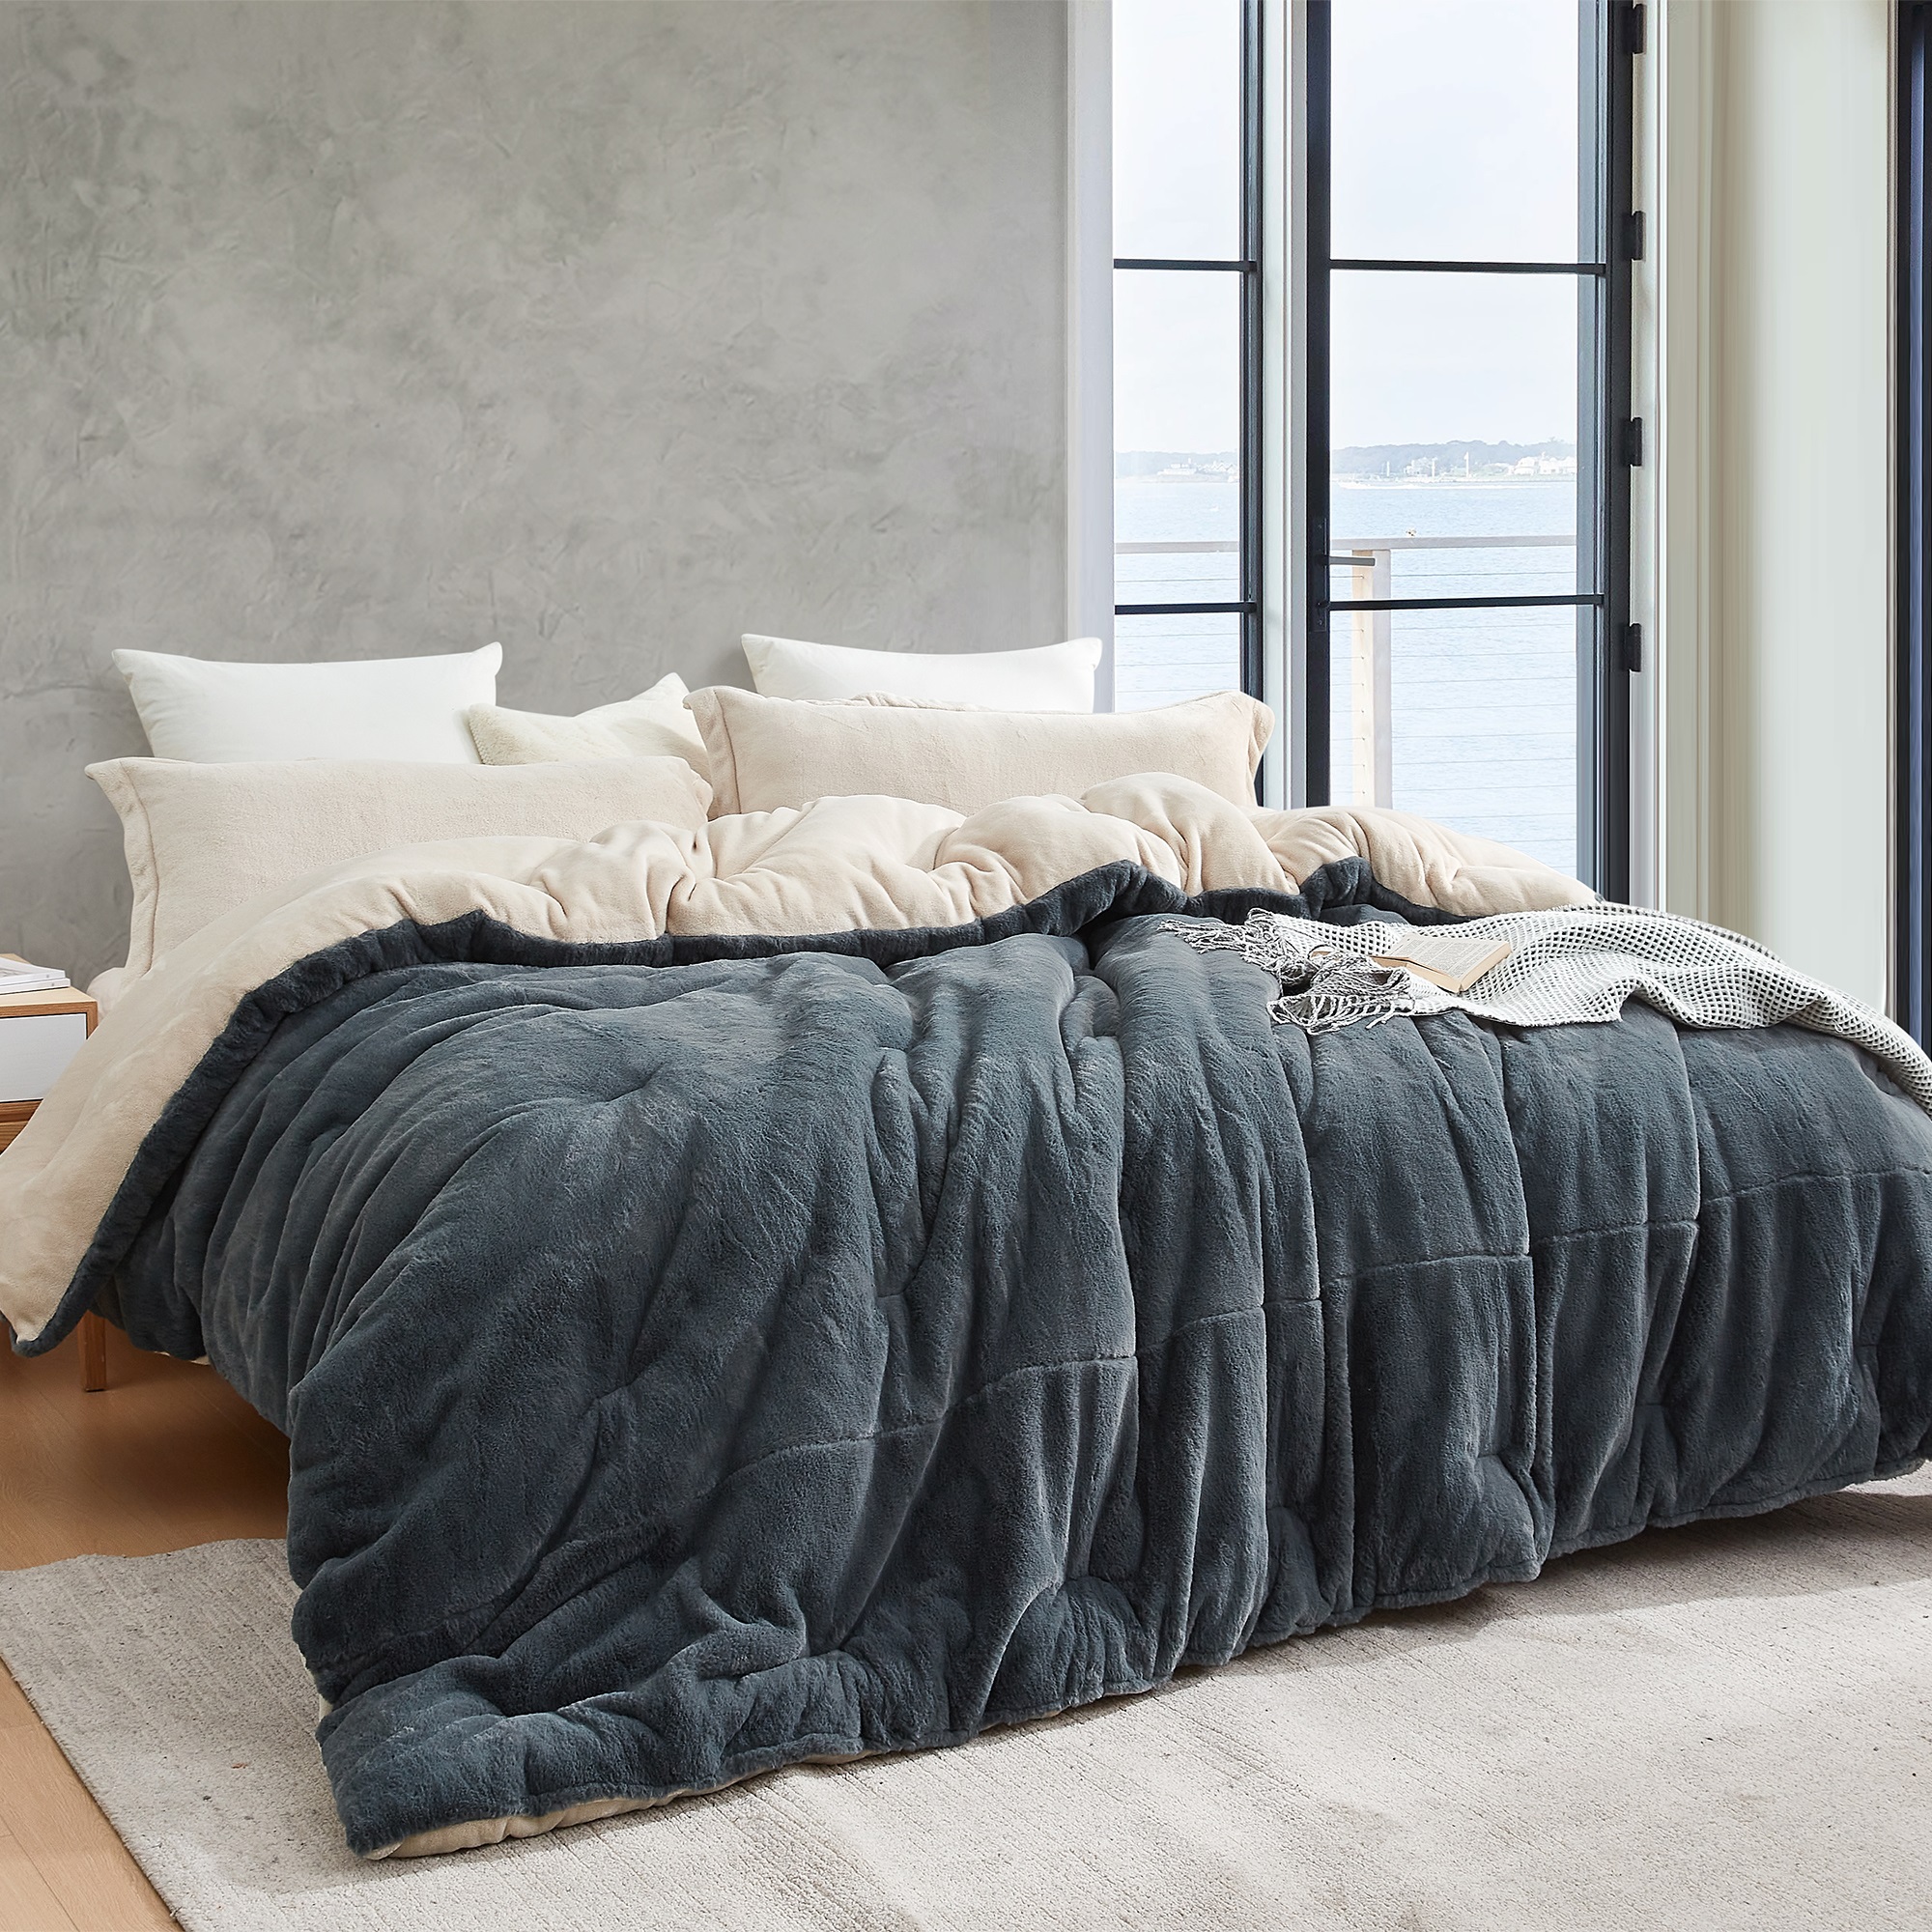 Plumpy Pudgy Portly Chunky Bunny - Coma Inducer® Oversized Queen Comforter - Poppy Seed Birch